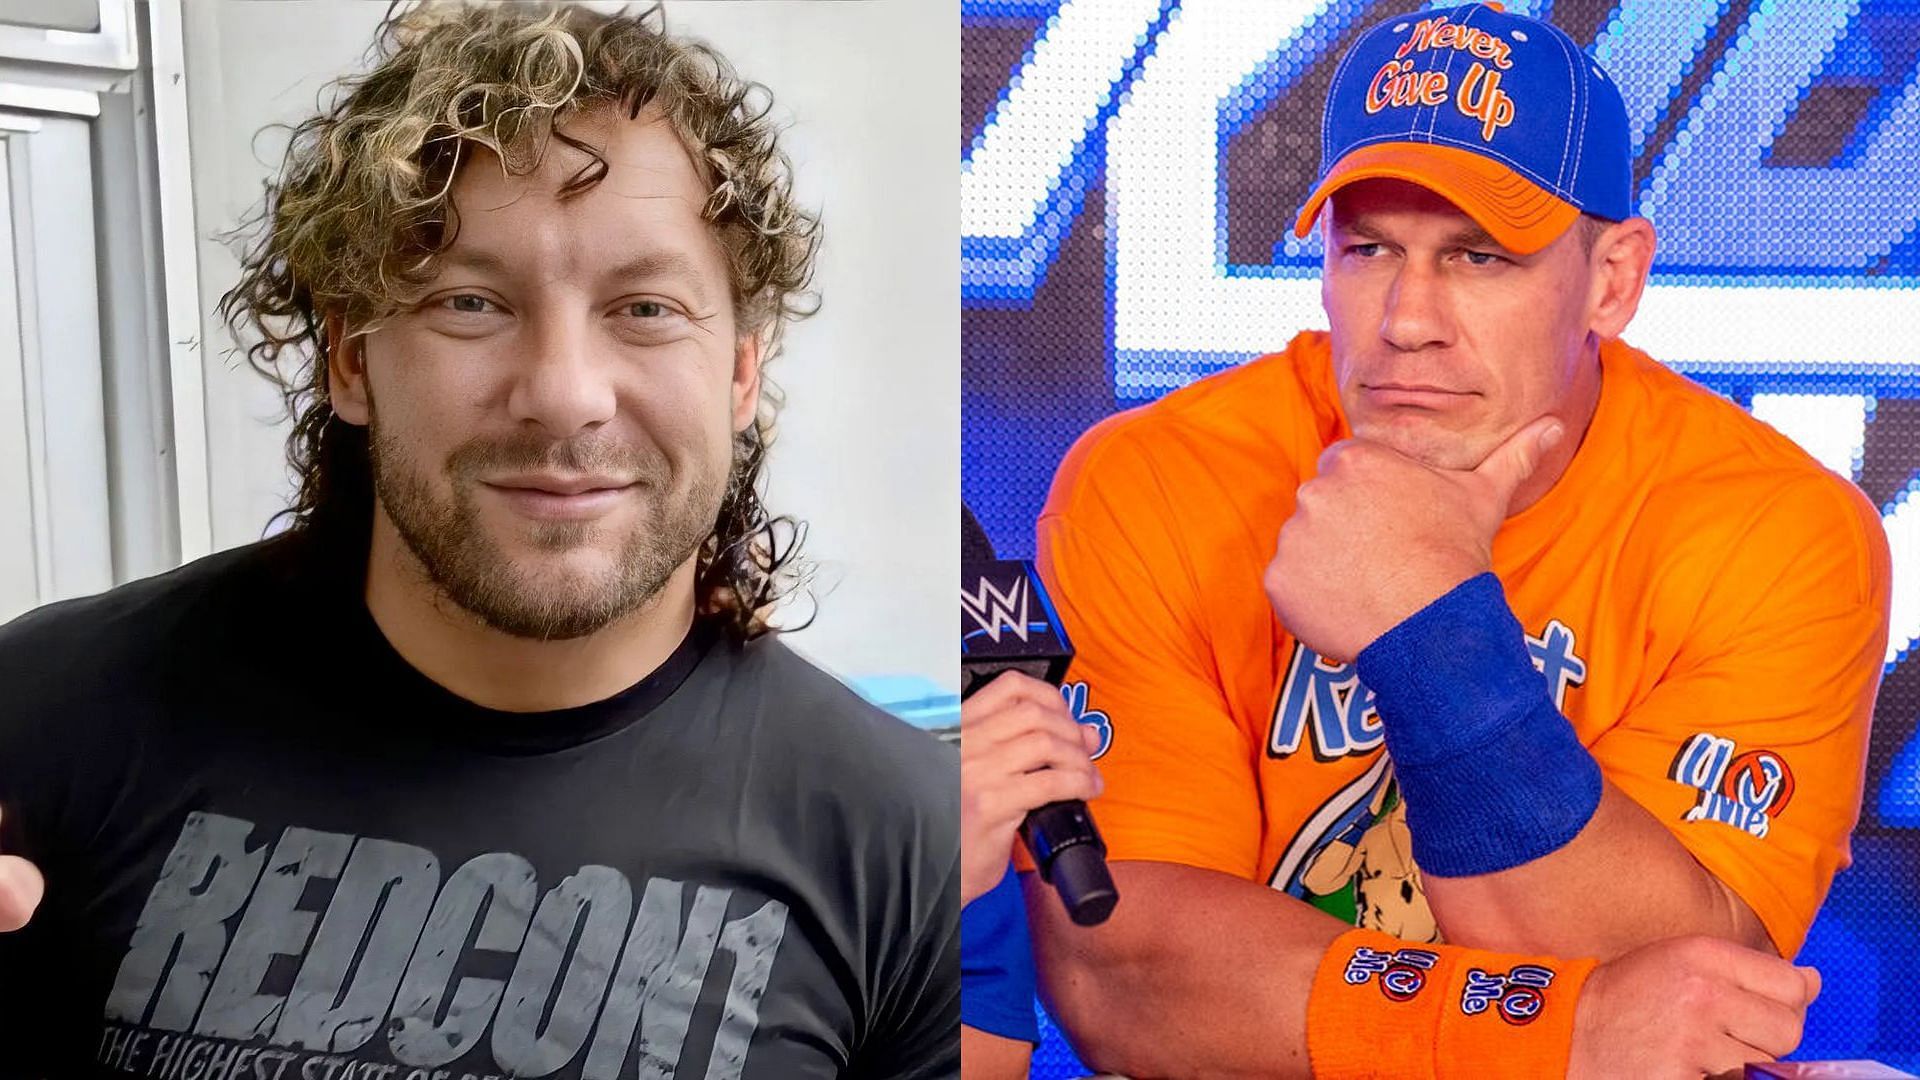 Omega and Cena share a mutual respect (image credits: Kenny Omega on Instagram; WWE.com)